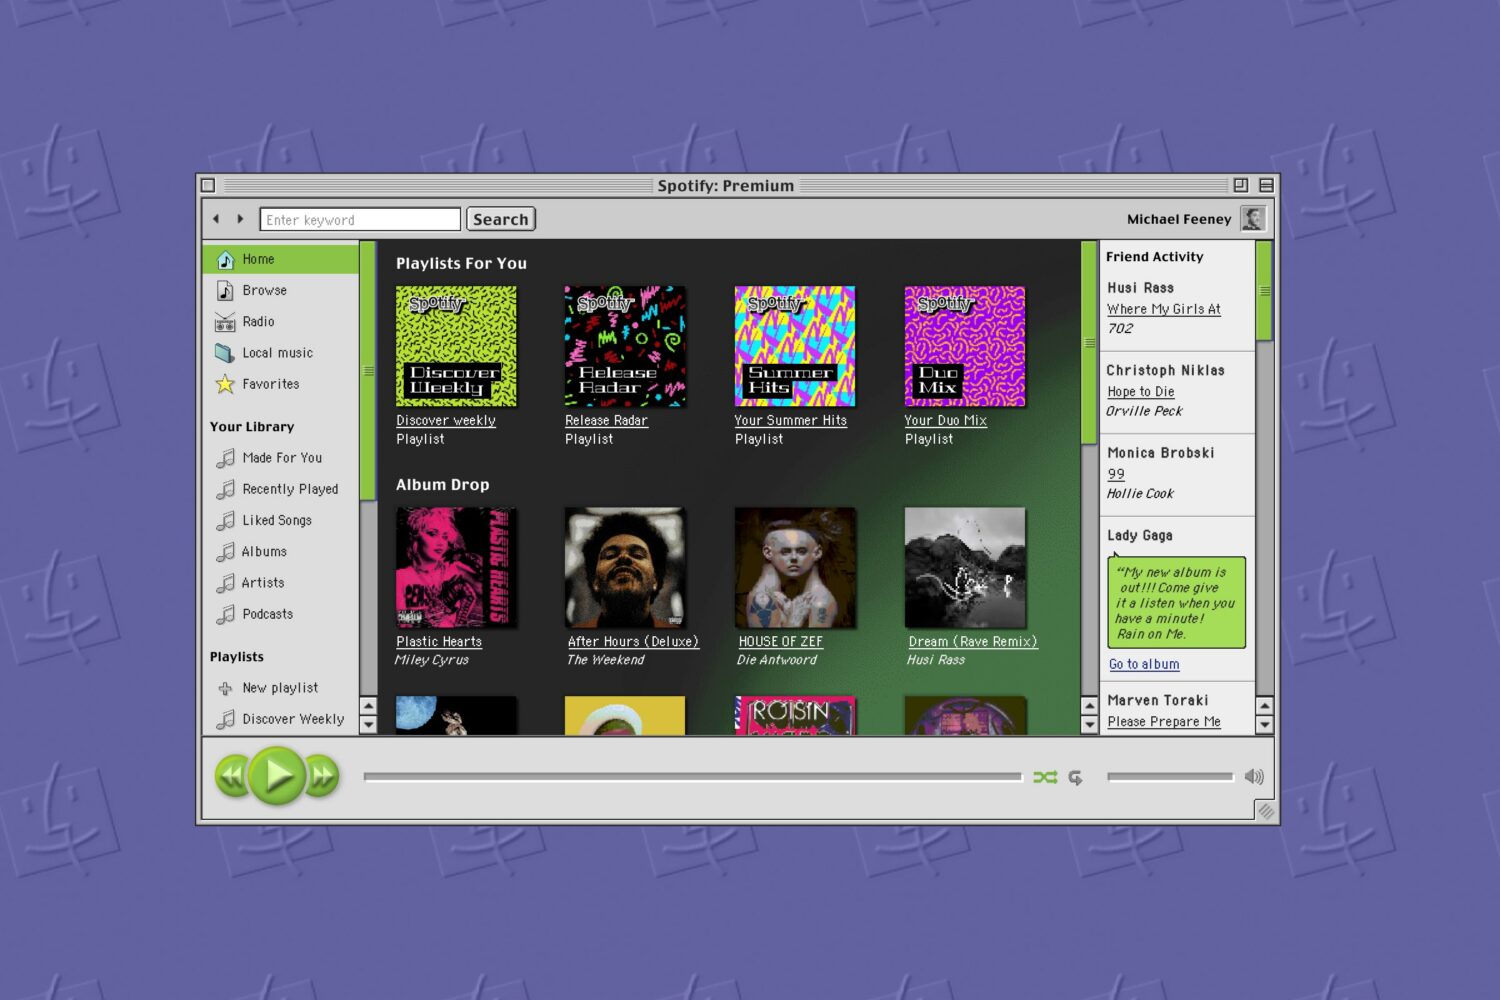 A mockup by graphic designer Michael Feeney reimagining what Spotify for macOS would have looked liked in the Mac OS 9 era back in 1999